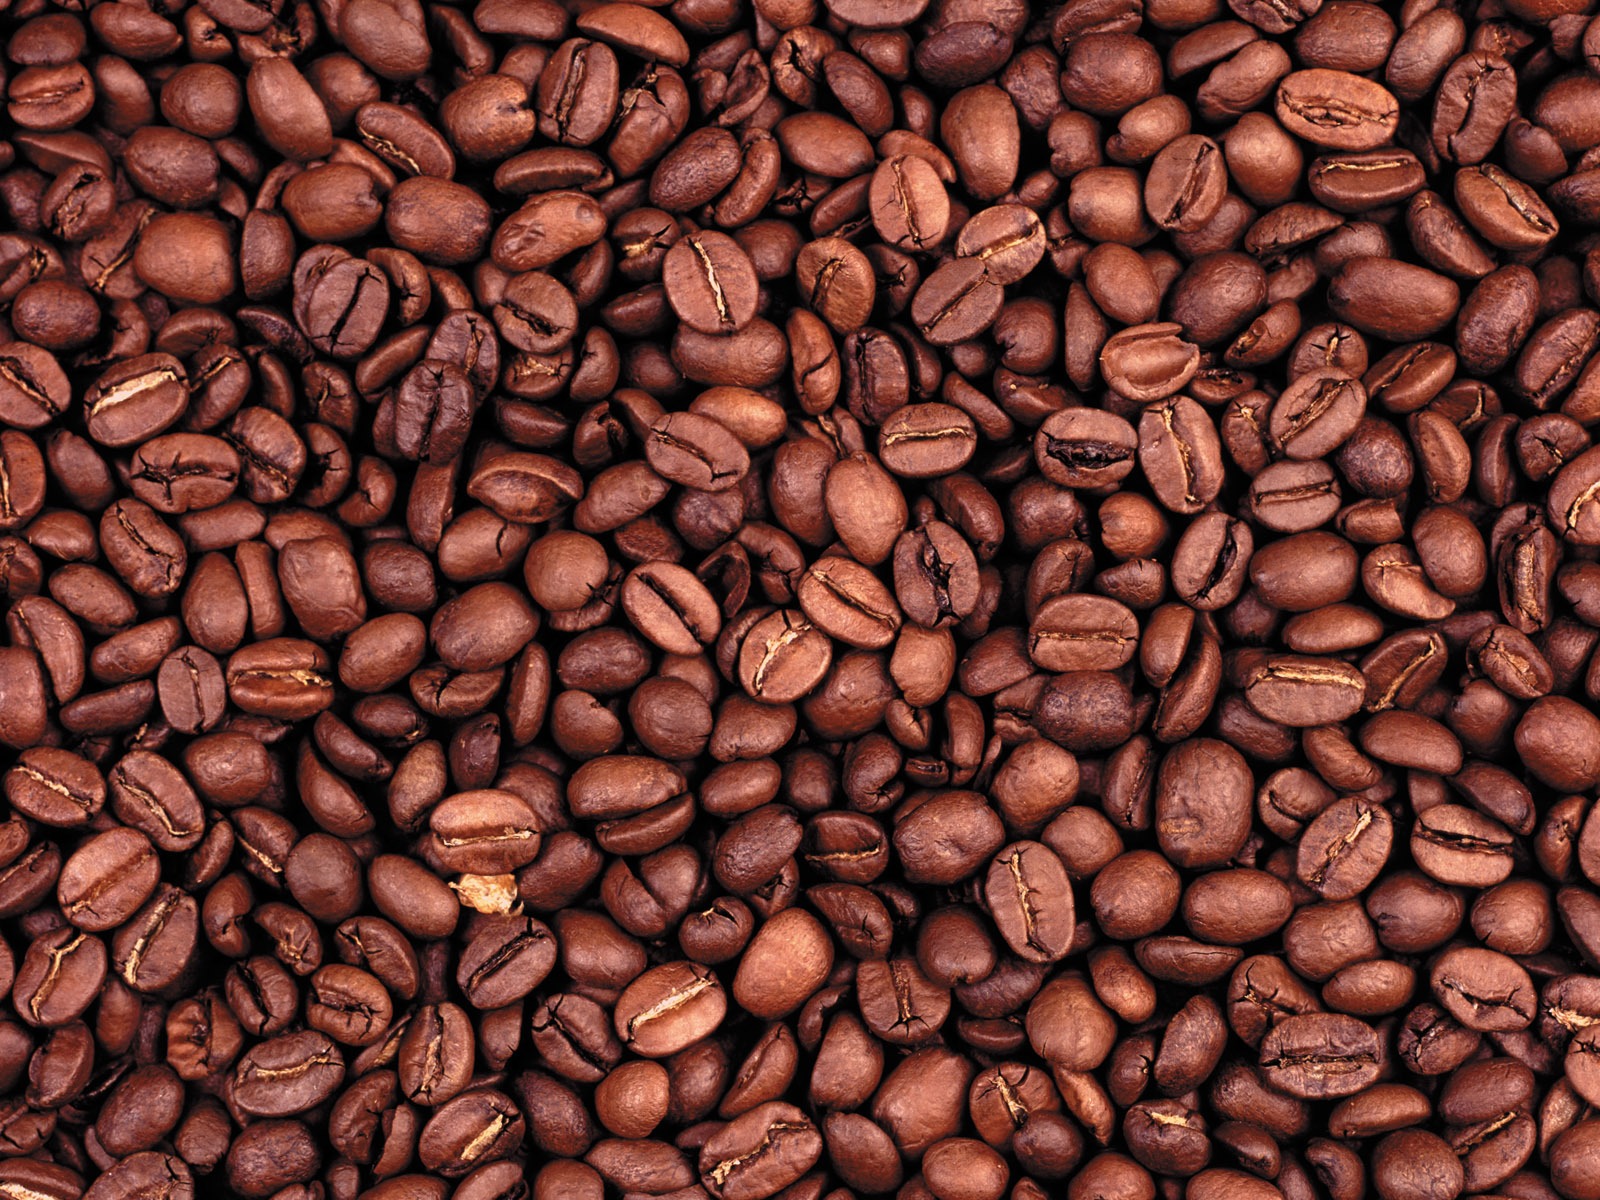 Coffee feature wallpaper (6) #11 - 1600x1200